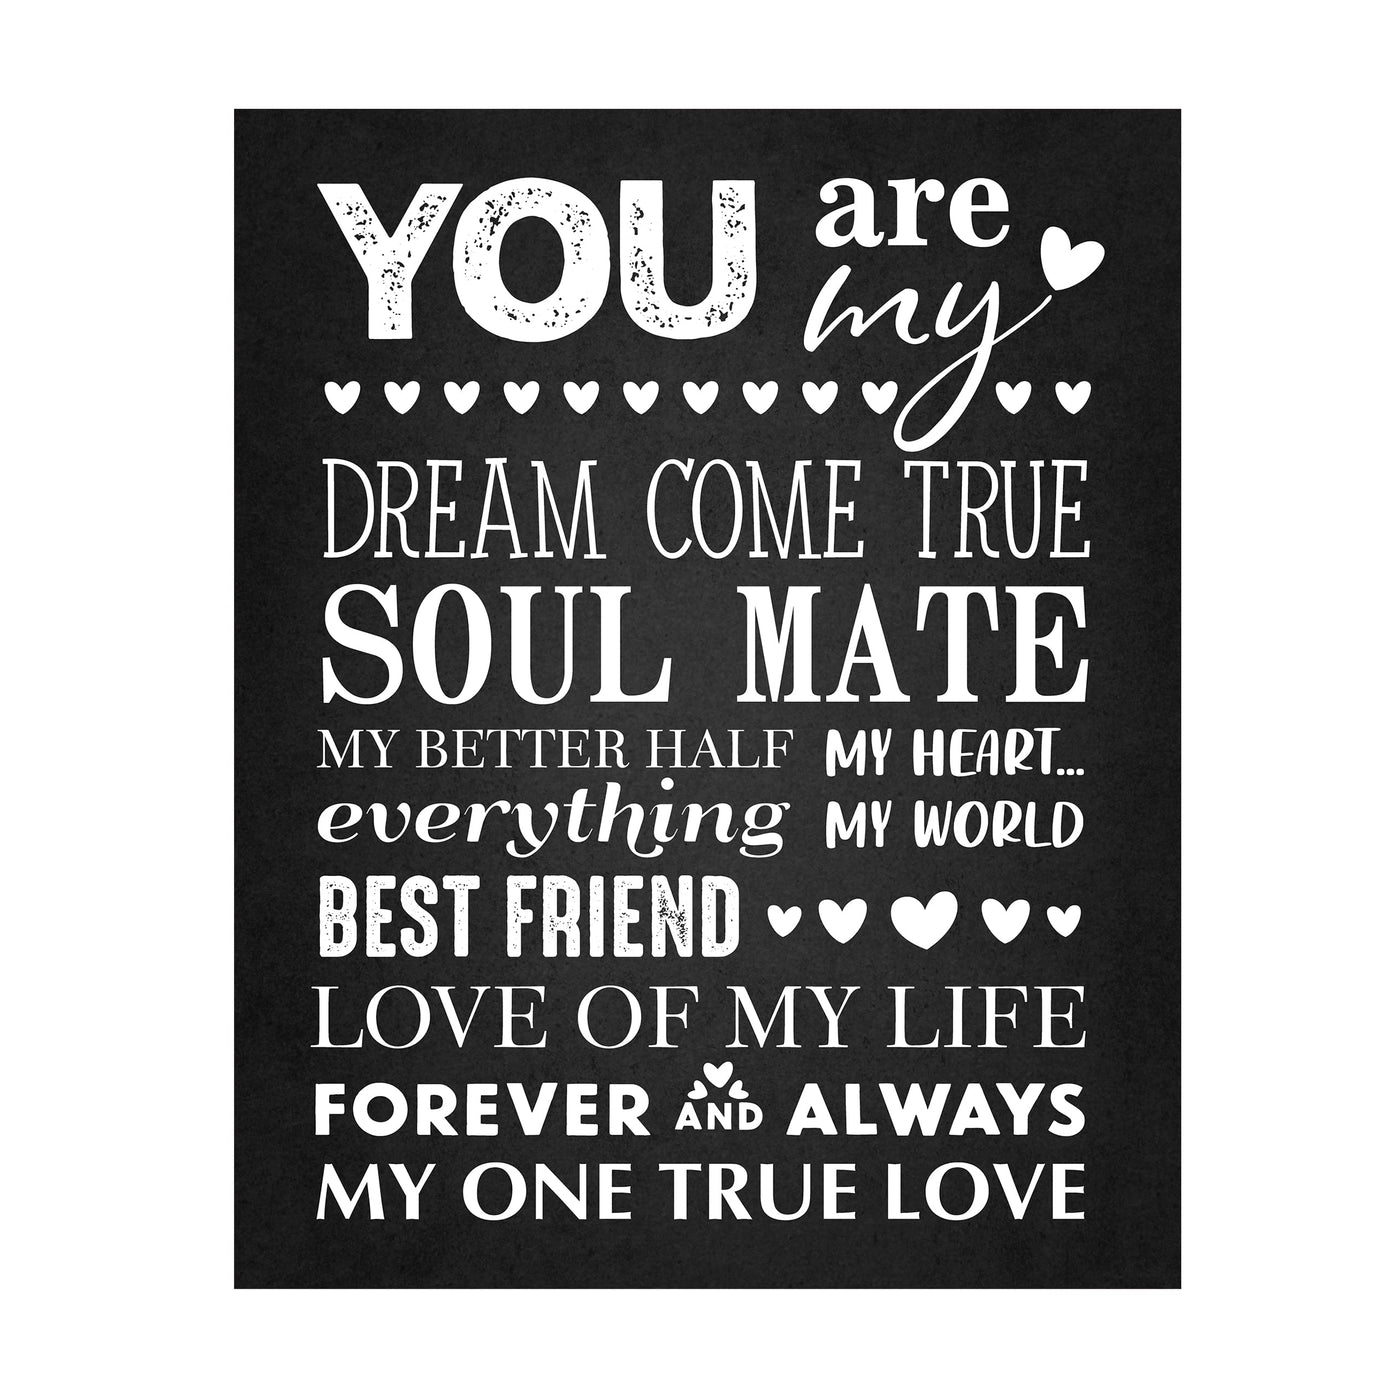 THE ONE TRUE LOVE QUOTES –